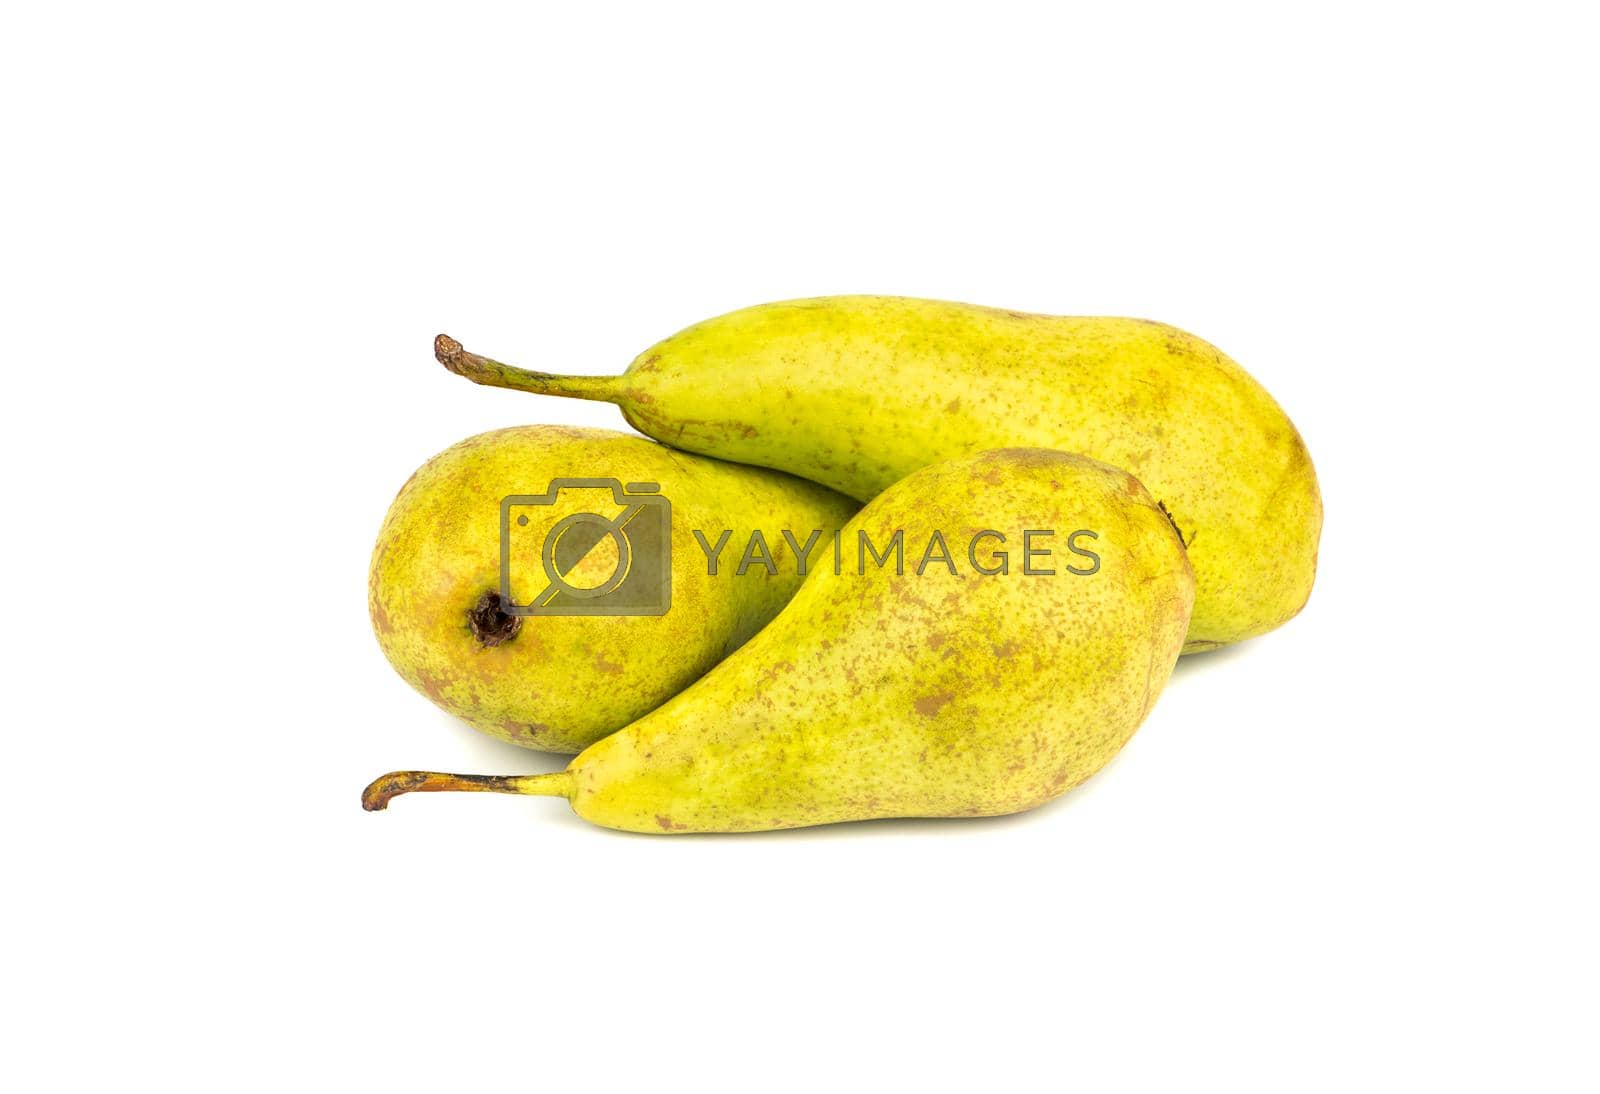 Royalty free image of Three pears by andregric